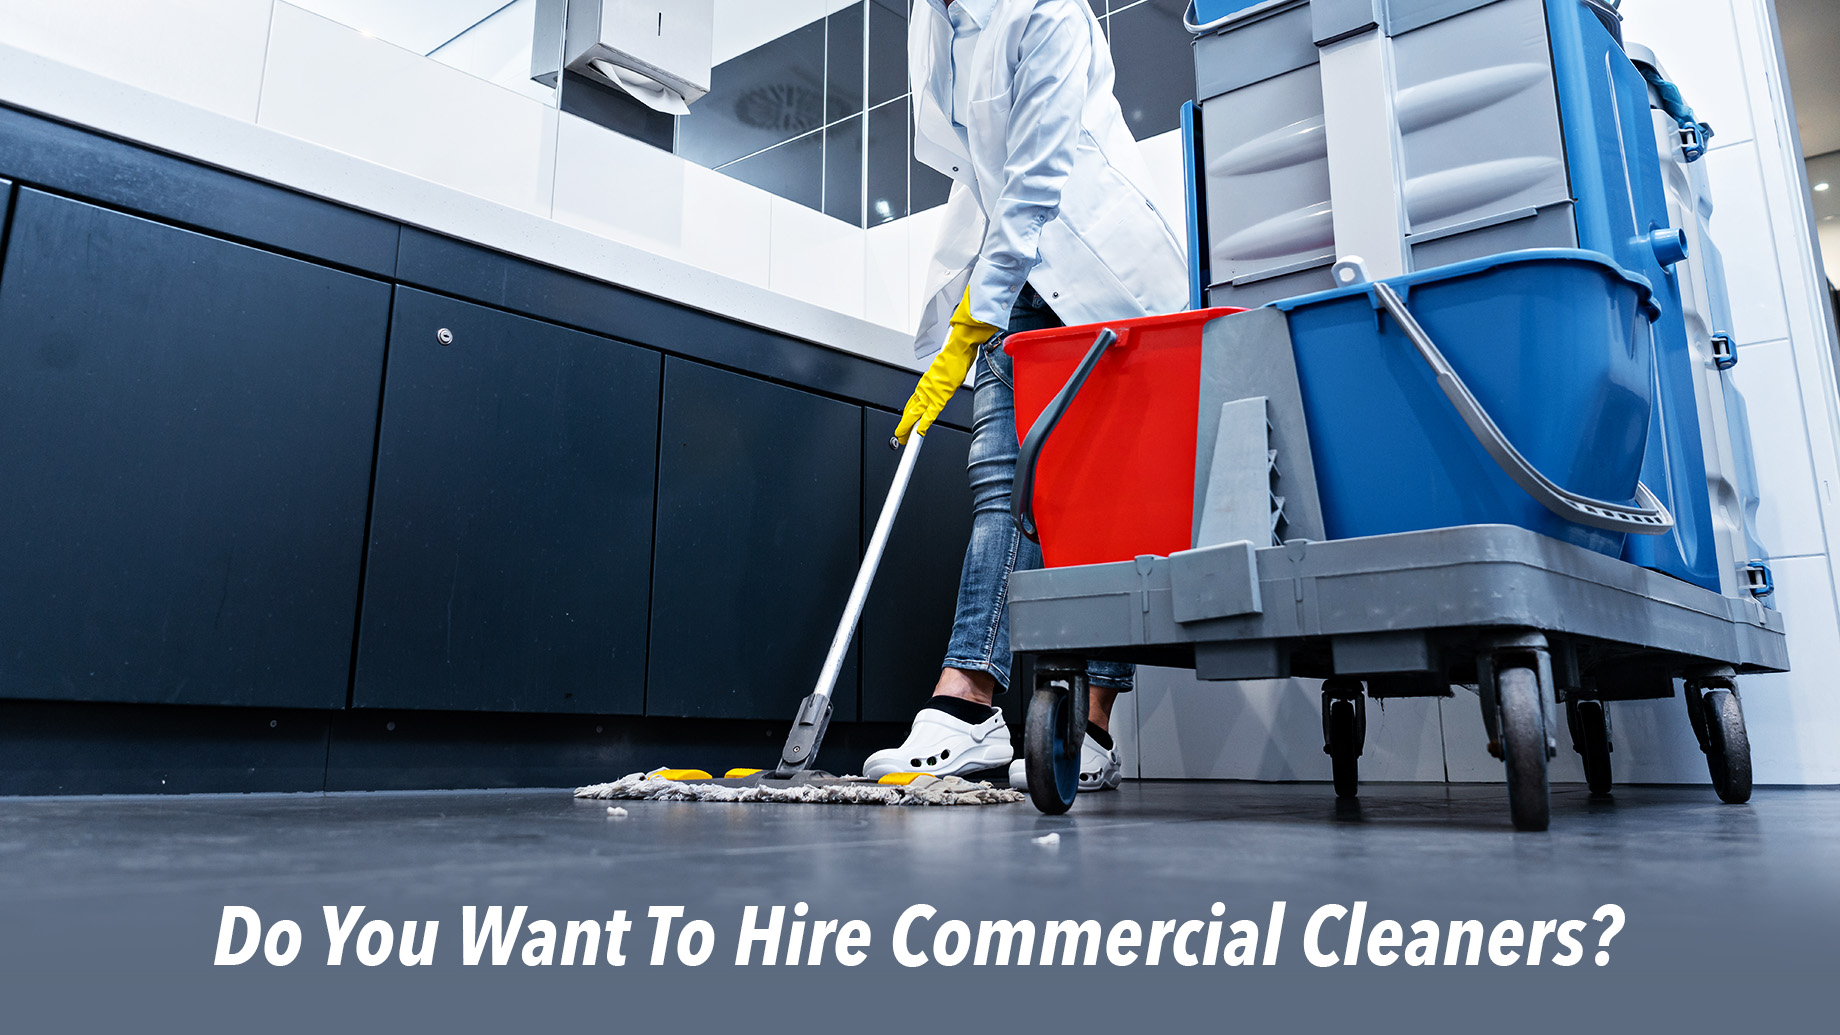 Do You Want To Hire Commercial Cleaners?